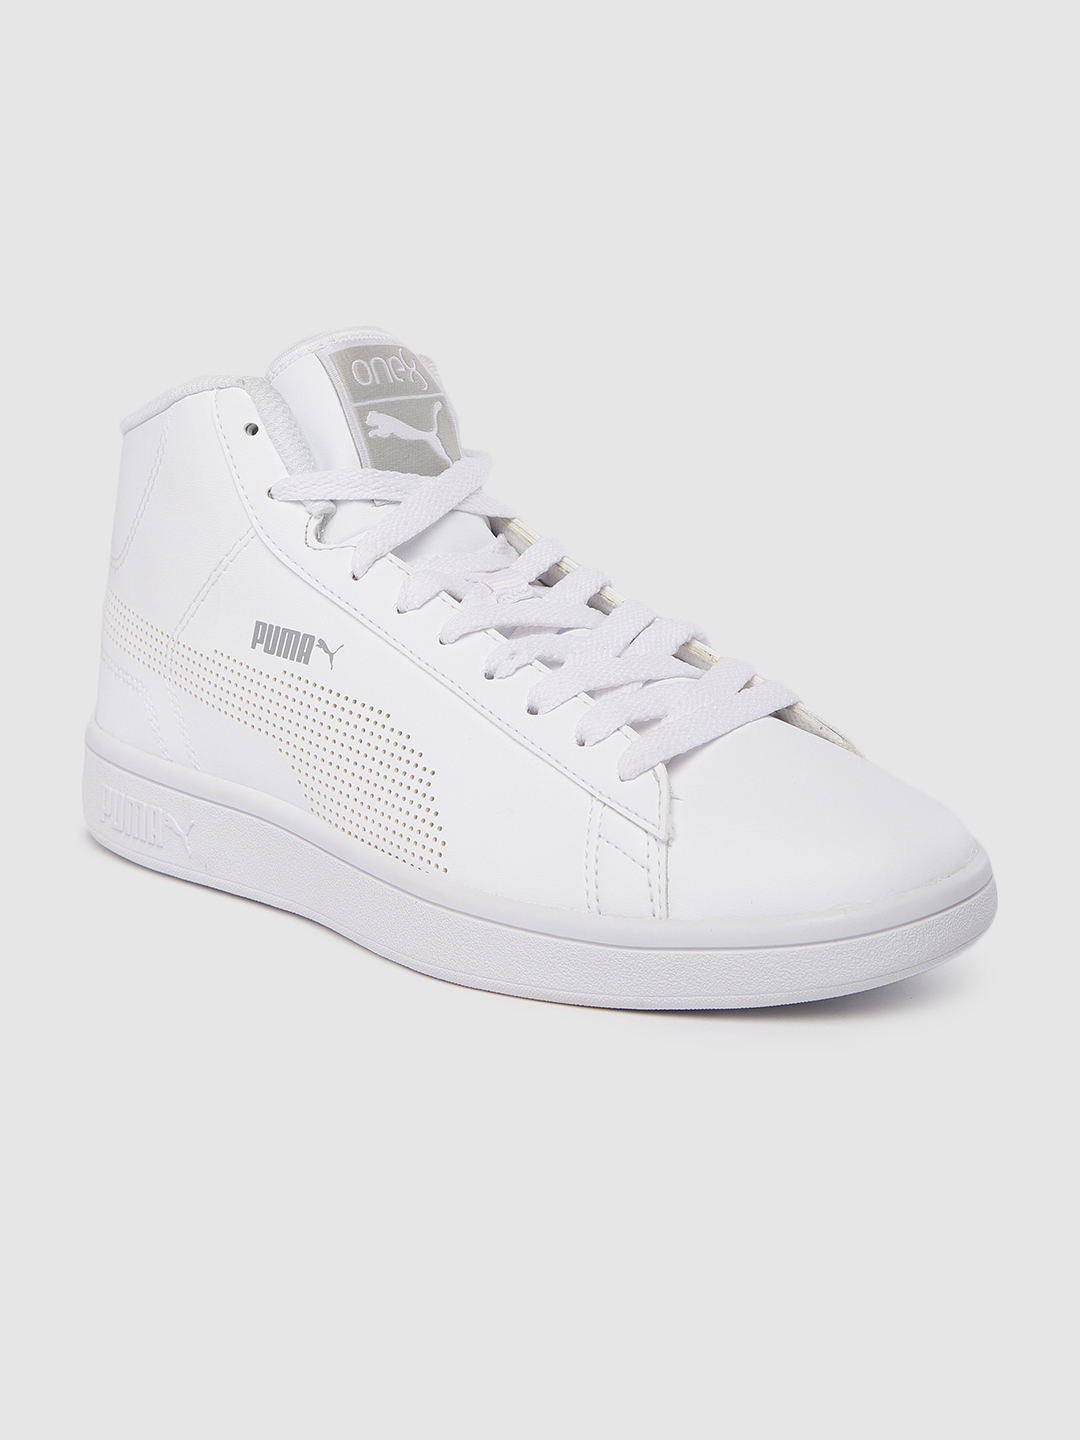 Buy One8 X PUMA Men White Solid Smash Mid Cut Sneakers - Casual Shoes ...